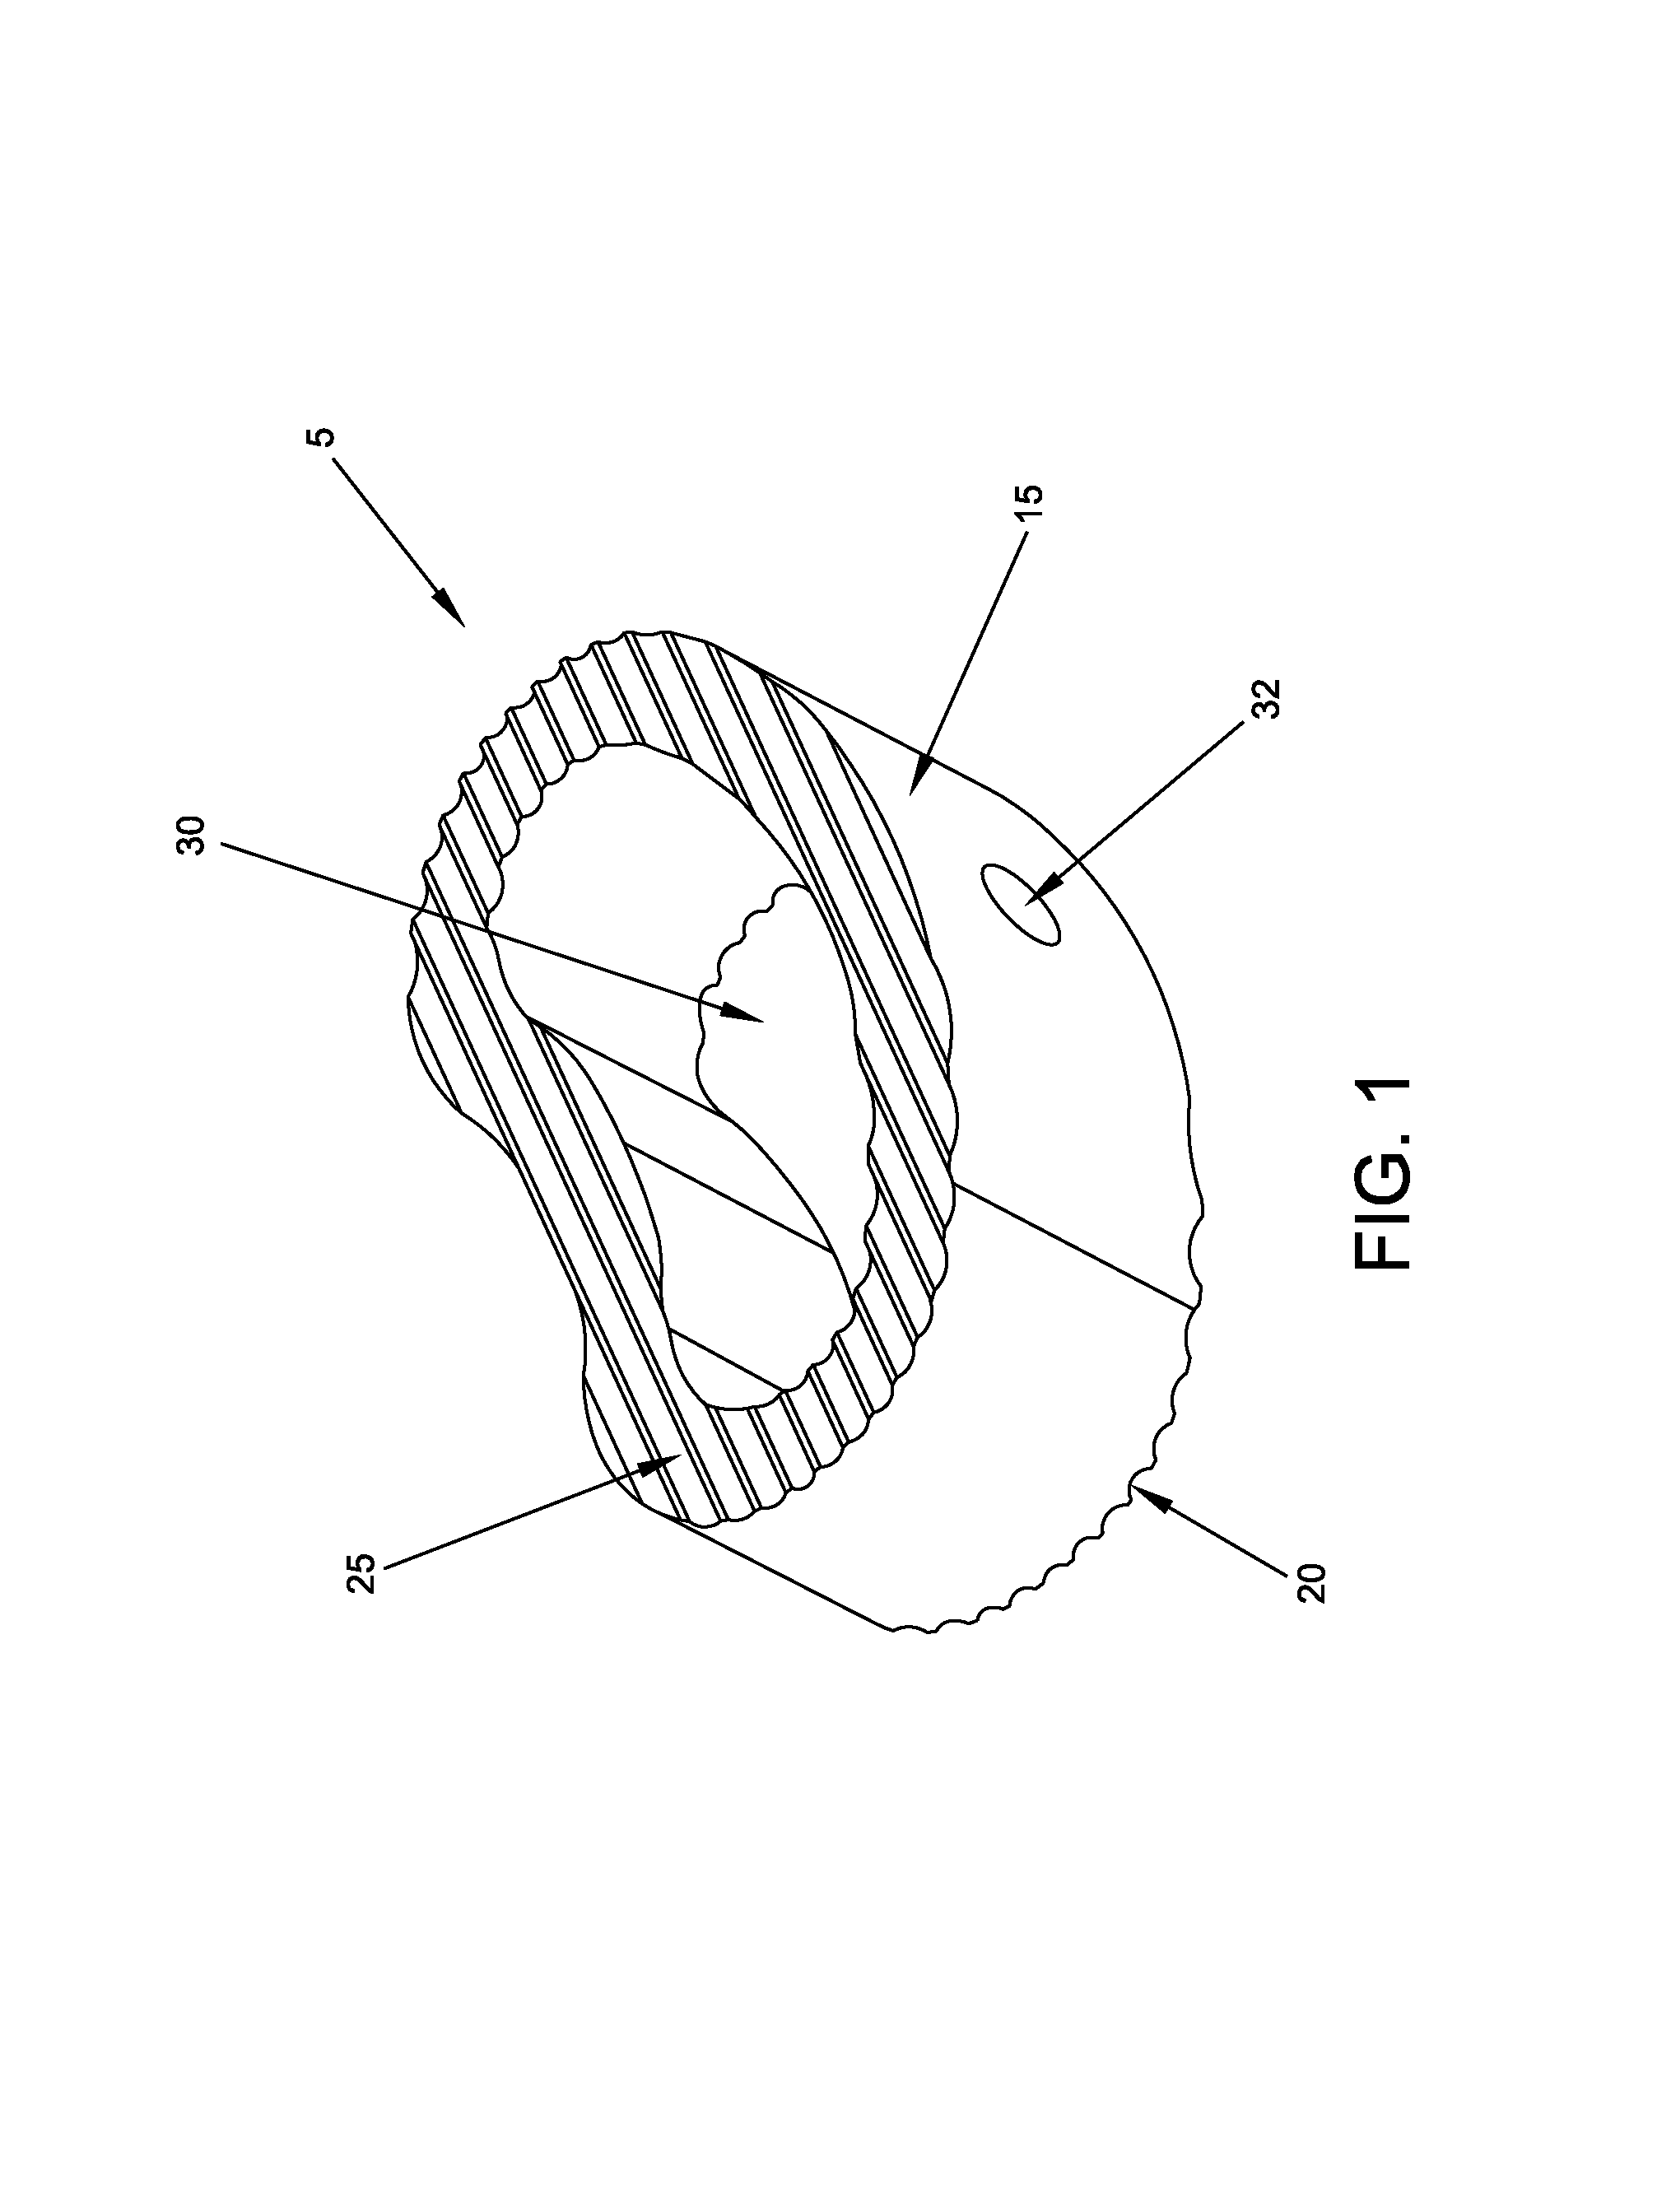 Method and apparatus for fusing the bones of a joint